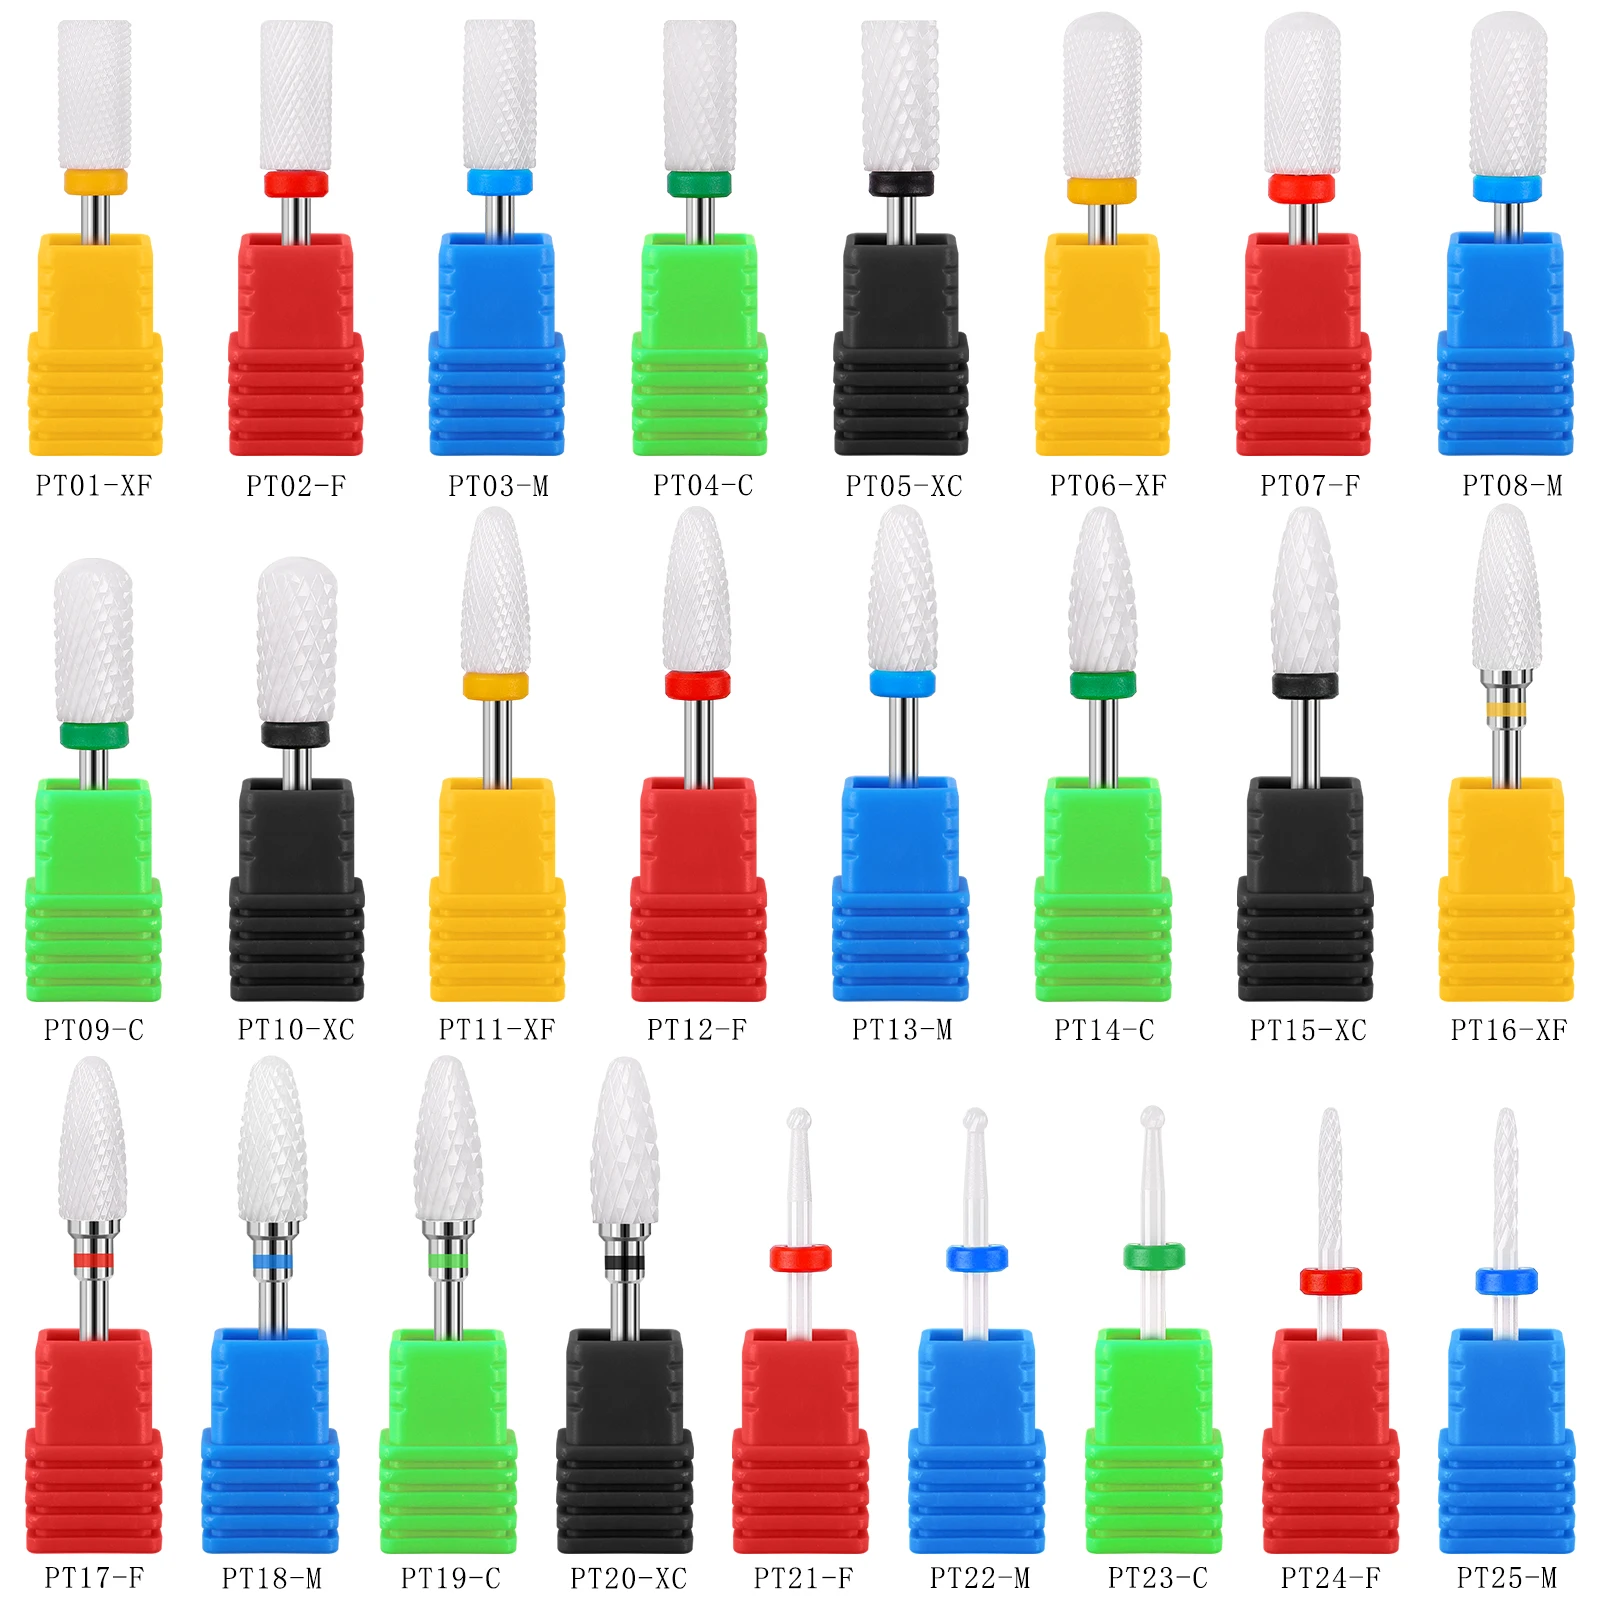 

New 25 Types Ceramic Nail Drill Bits Rotary Electric Machine Accessories Replacement Armor Removal Polishing Head Nail Tool